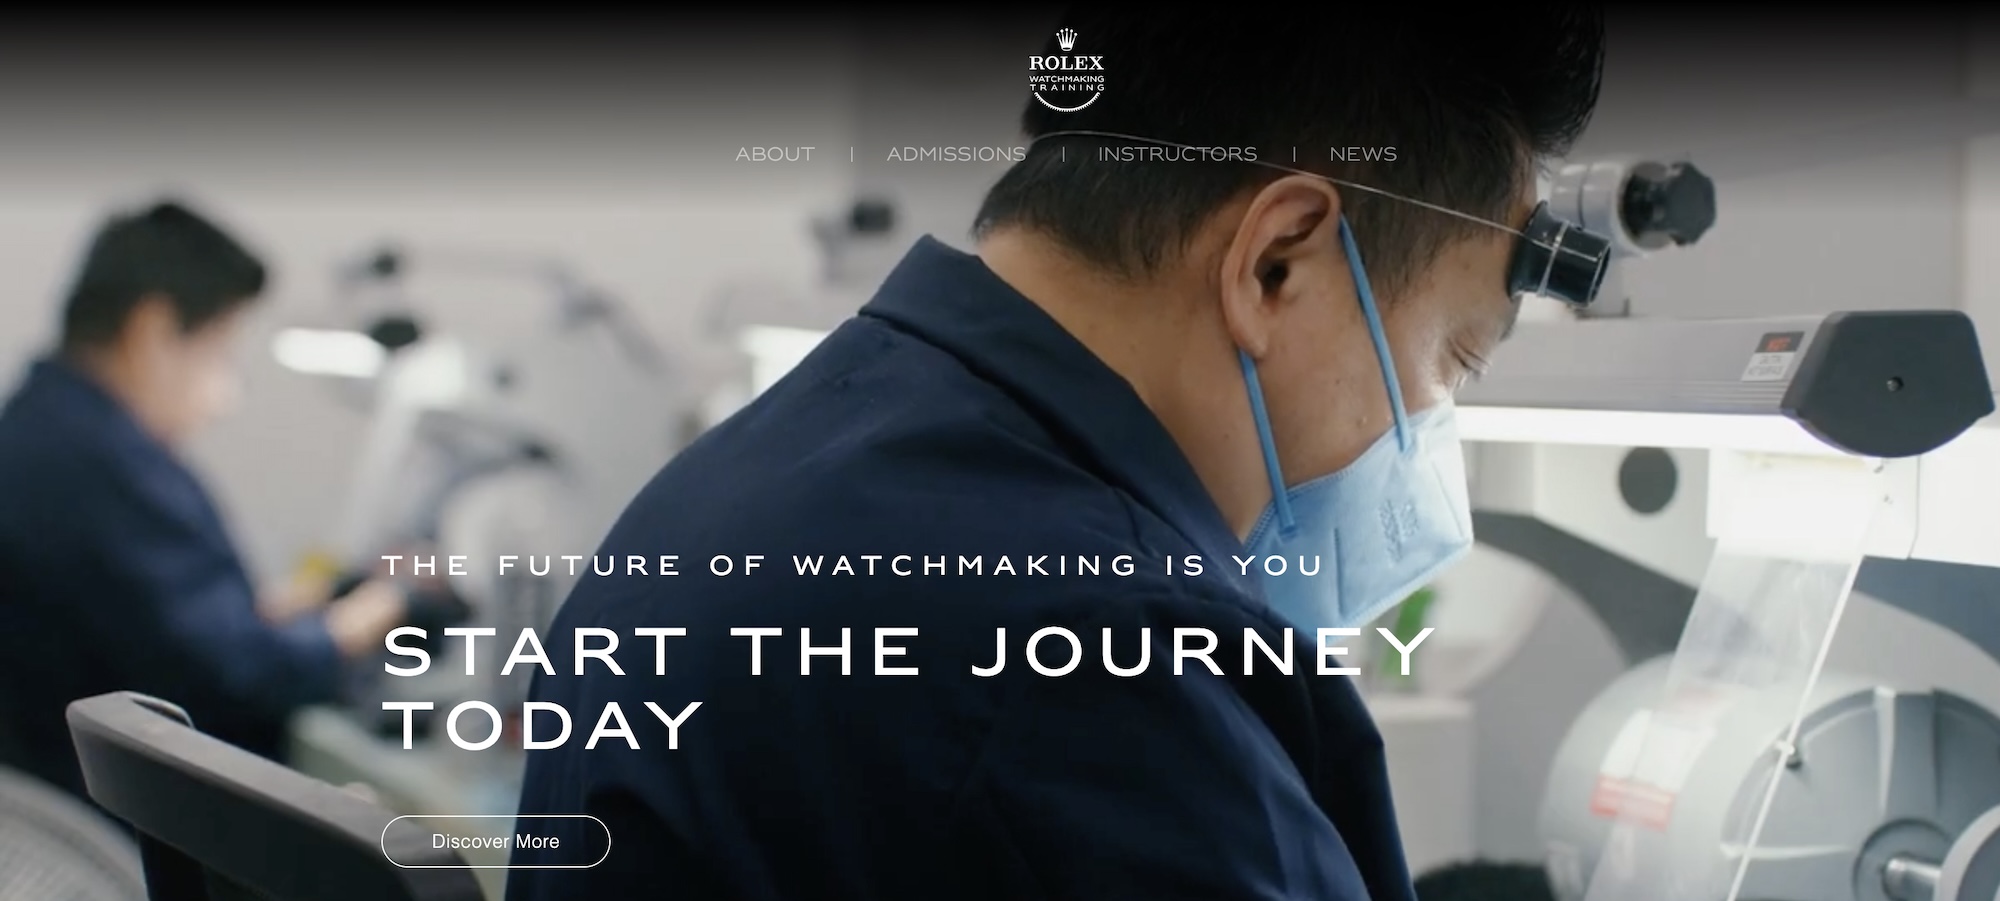 American Rolex Watchmaking Center Accepting Applications For 18-Month Tuition-Free Training | aBlogtoWatch